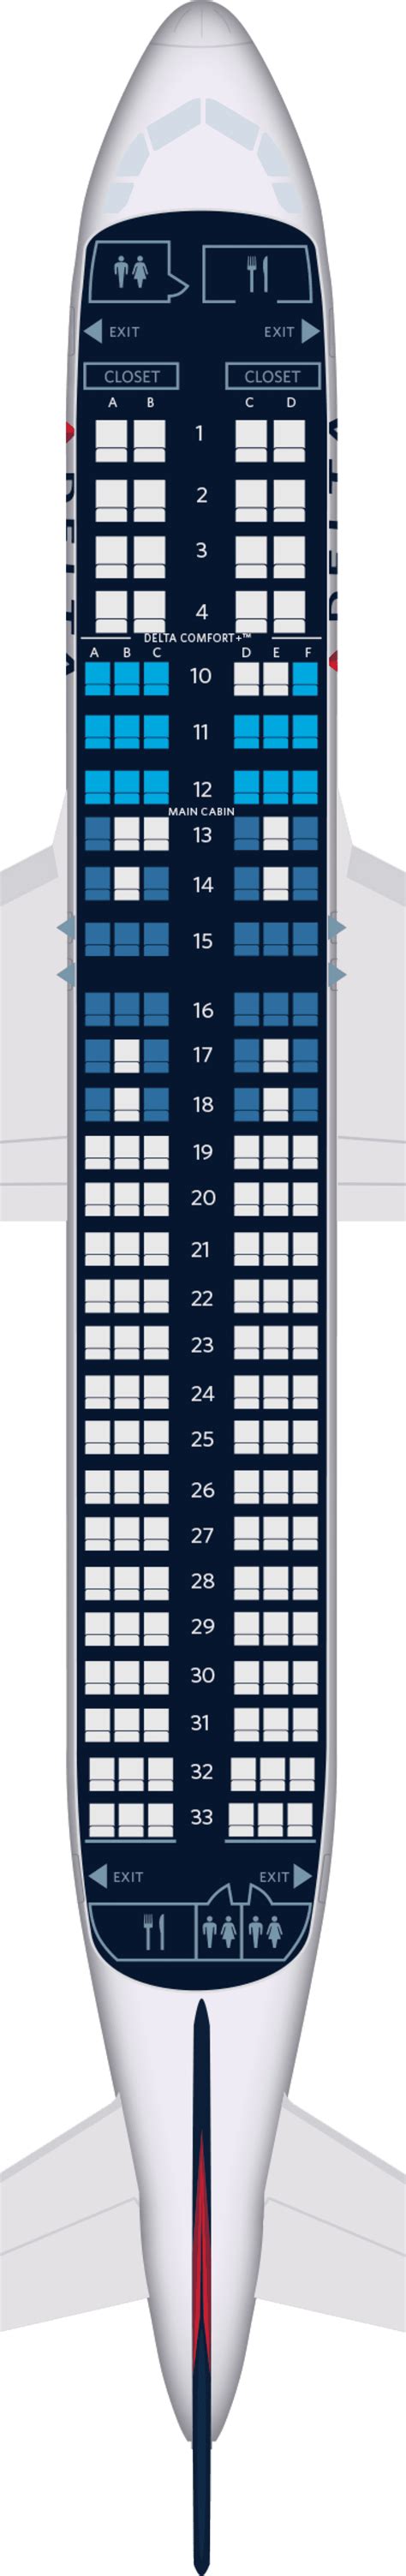 Planes & Seat Maps > Airbus A320neo (320) Volaris Seat Maps. Airbus A320neo (320) Overview; Planes & Seat Maps. Airbus A319 (319) Airbus A320 (320) ... Seat 31 F is a standard Economy Class seat located in the last row of the aircraft. This seat may have limited to no seat back recline and the proximity to the galley, lavatories and rear of the .... 